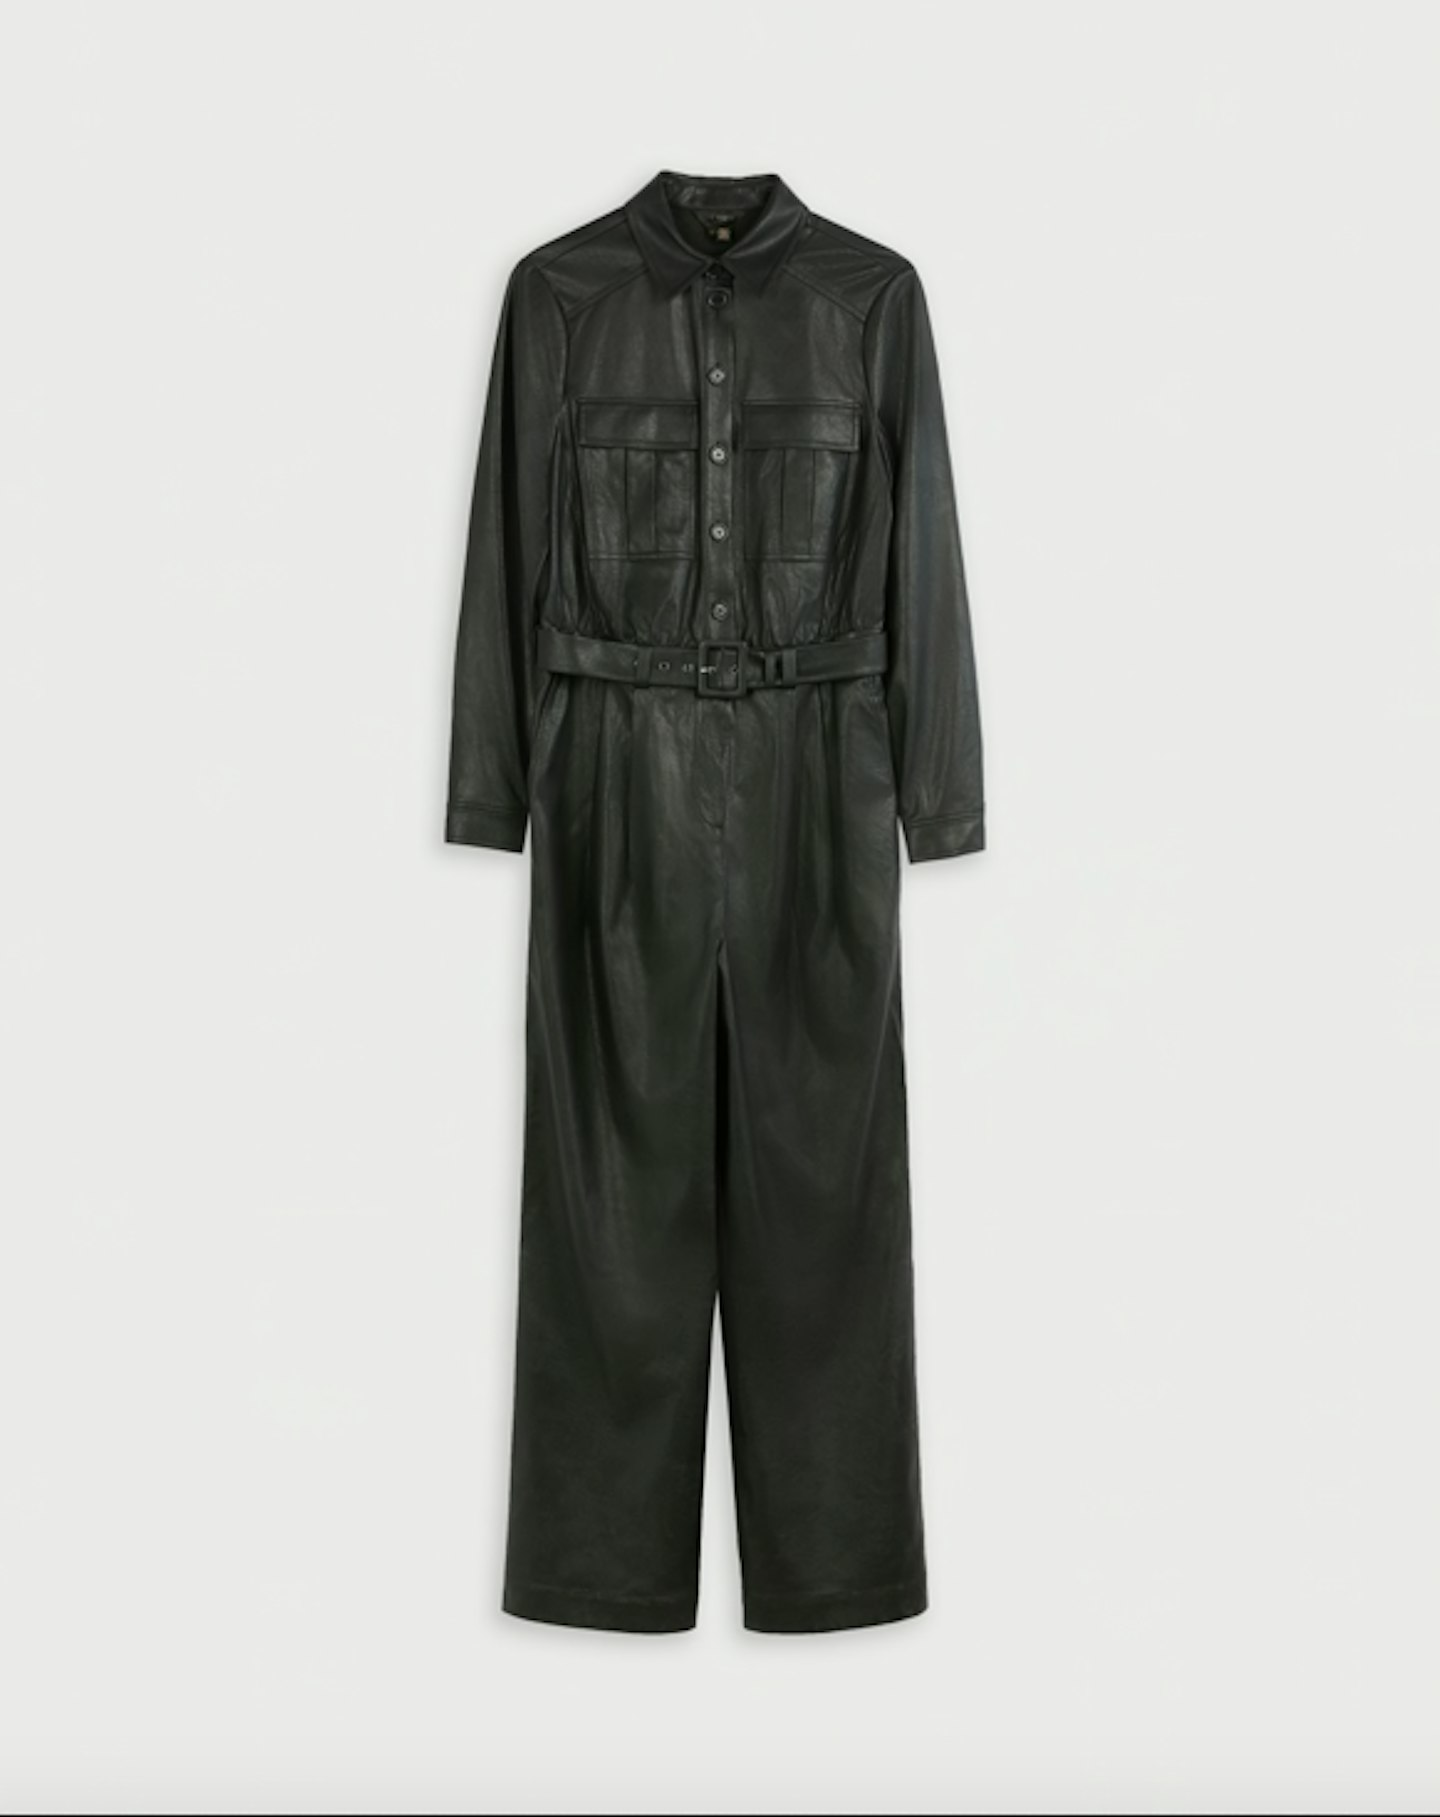 Ted Baker, Belted pleather jumpsuit, WAS £350 NOW £210